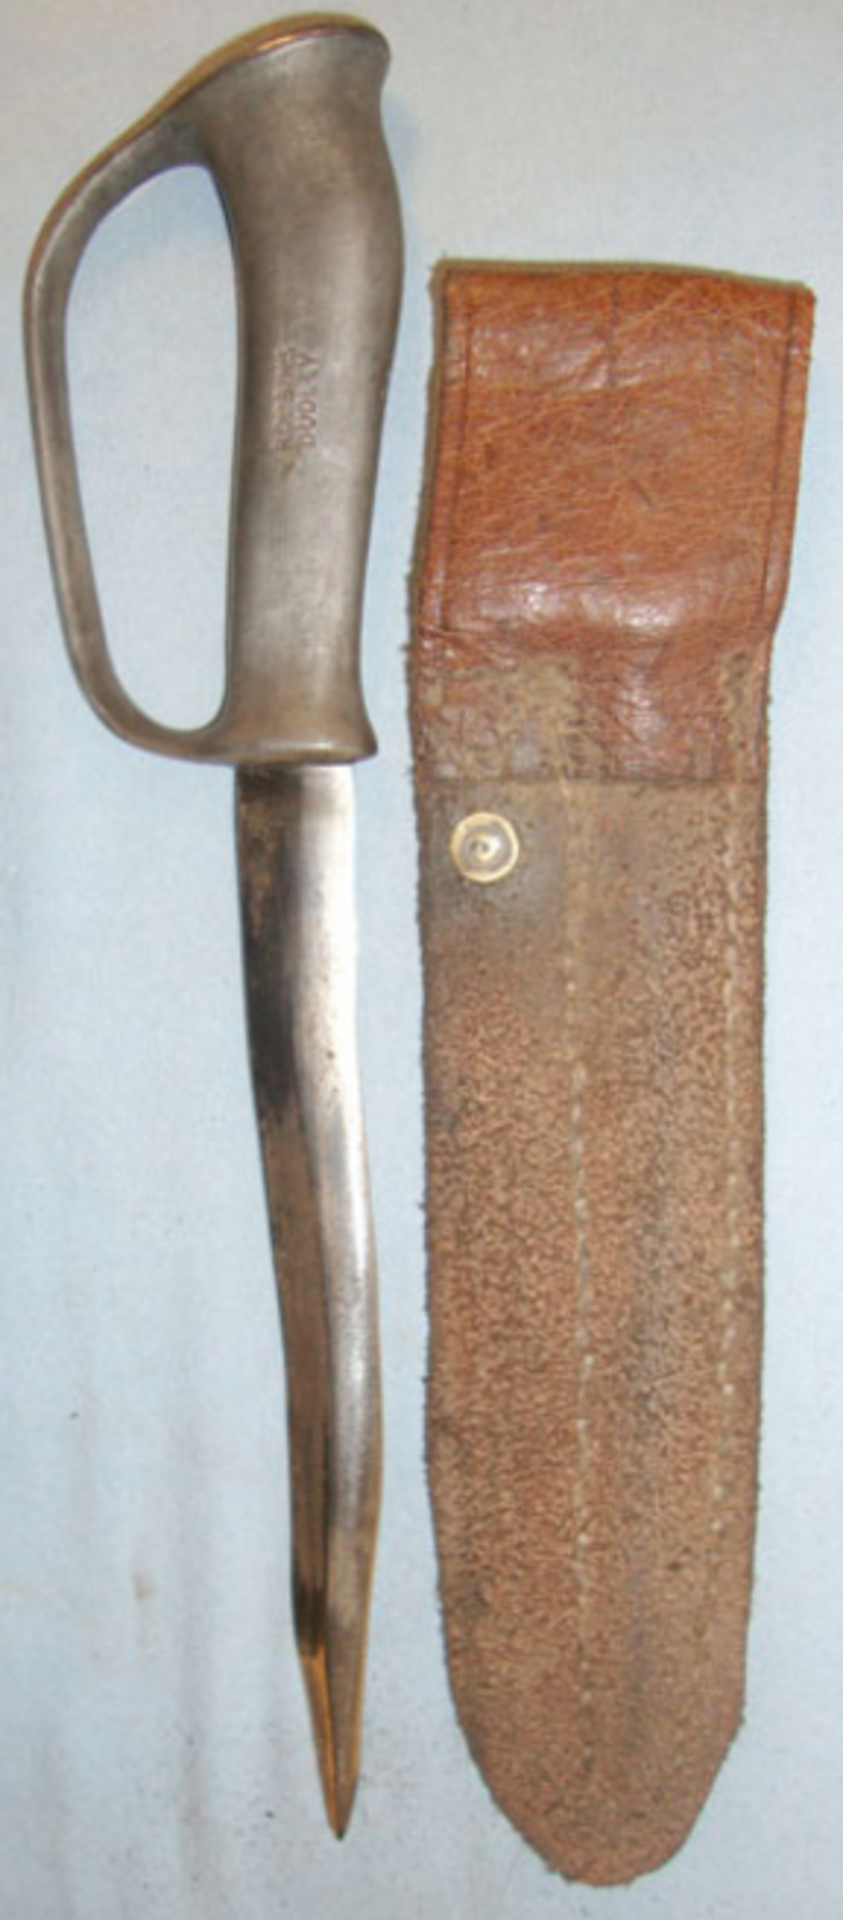 RARE VARIANT, WW1 Robbins Of Dudley Trench Fighting Knife With Kris Form Blade & Leather Sheath - Image 3 of 3